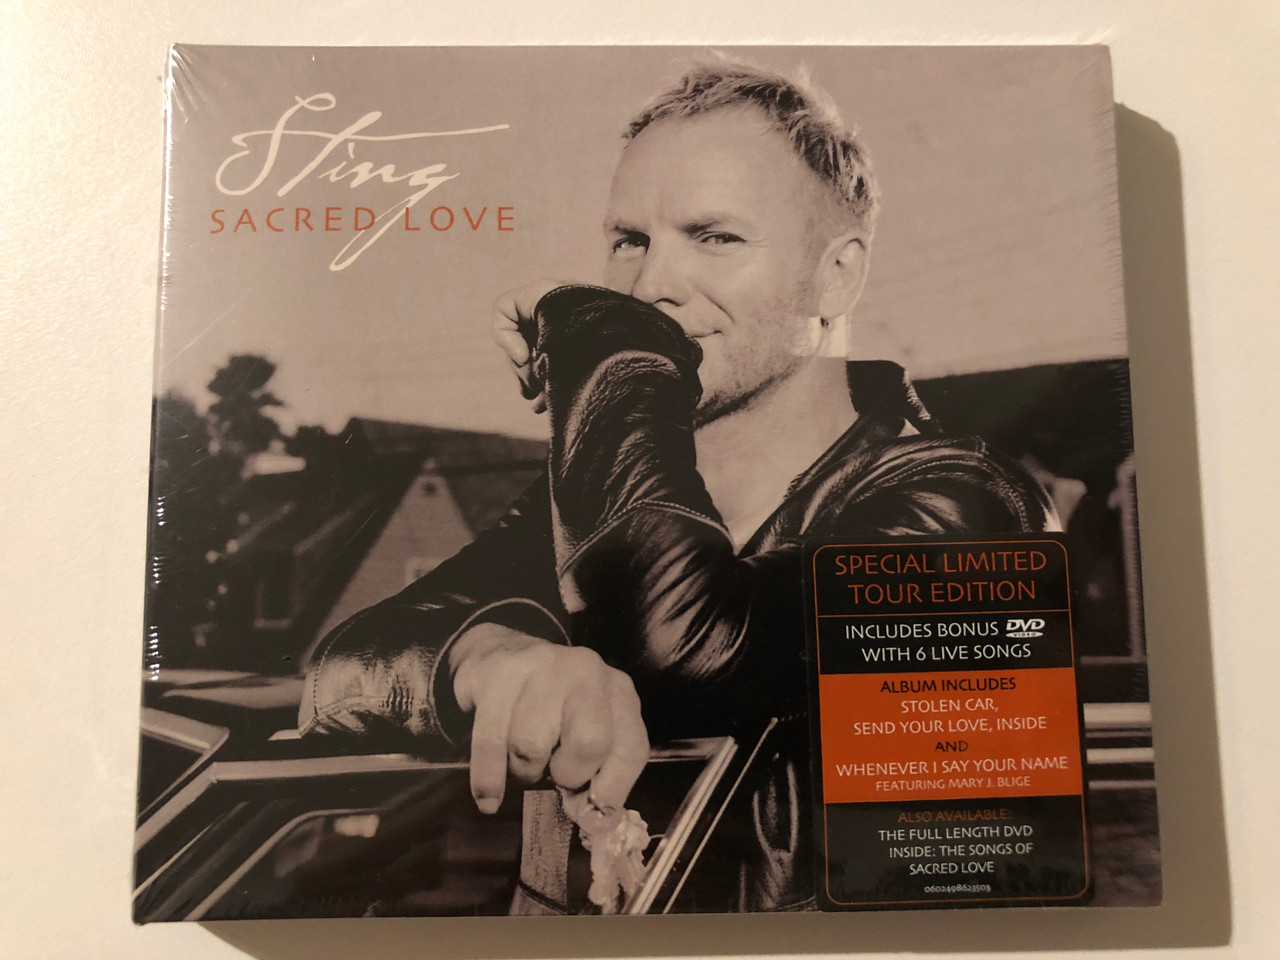 https://cdn10.bigcommerce.com/s-62bdpkt7pb/products/0/images/247044/Sting_Sacred_Love_Special_Limited_Tour_Edition_Includes_Bonus_DVD_With_6_Live_Songs_Album_Includes_Stolen_Car_Send_Your_Love_Insidee_and_Whenever_I_Say_Your_Name_AM_Records_Audio_CD_1__53320.1660032367.1280.1280.JPG?c=2&_gl=1*6sjn1t*_ga*MjA2NTIxMjE2MC4xNTkwNTEyNTMy*_ga_WS2VZYPC6G*MTY2MDAzMTM0My41MjEuMS4xNjYwMDMyMDk4LjQx